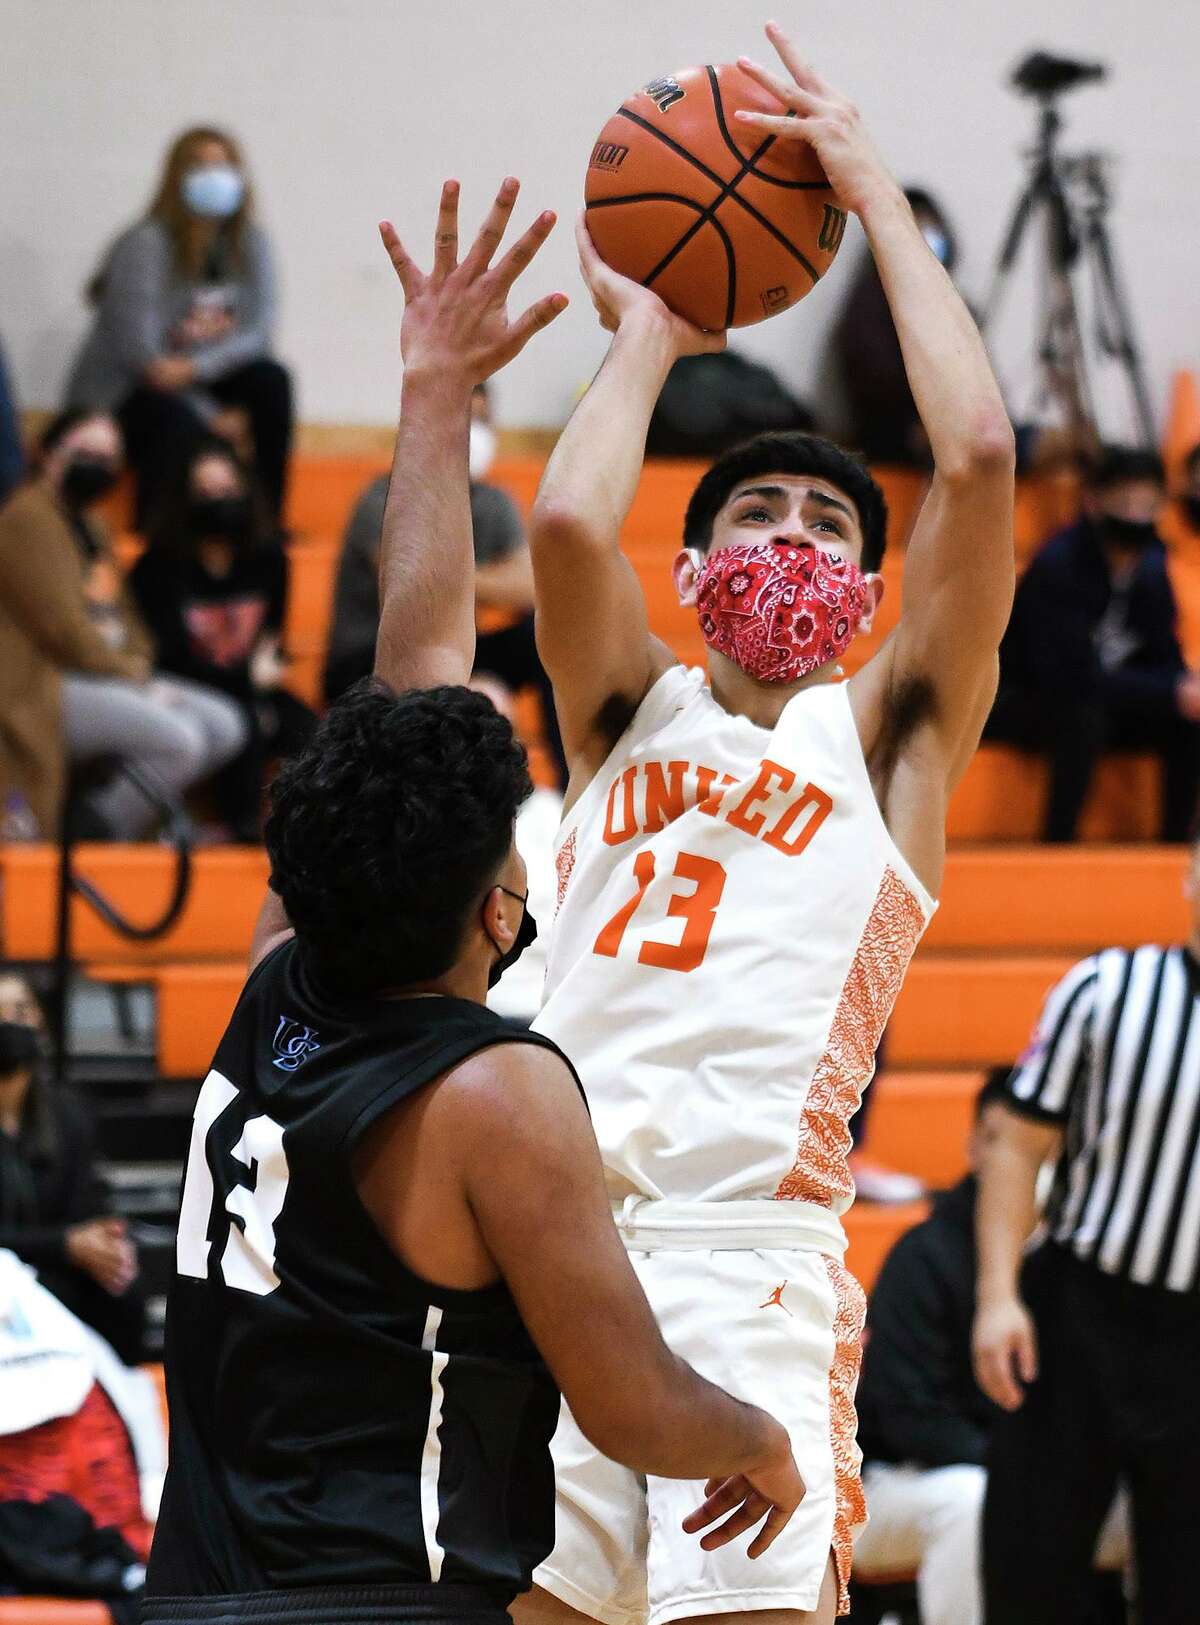 Carlos Puerto scored 13 points as United beat San Antonio Brennan 55-51 to advance in the state playoffs.